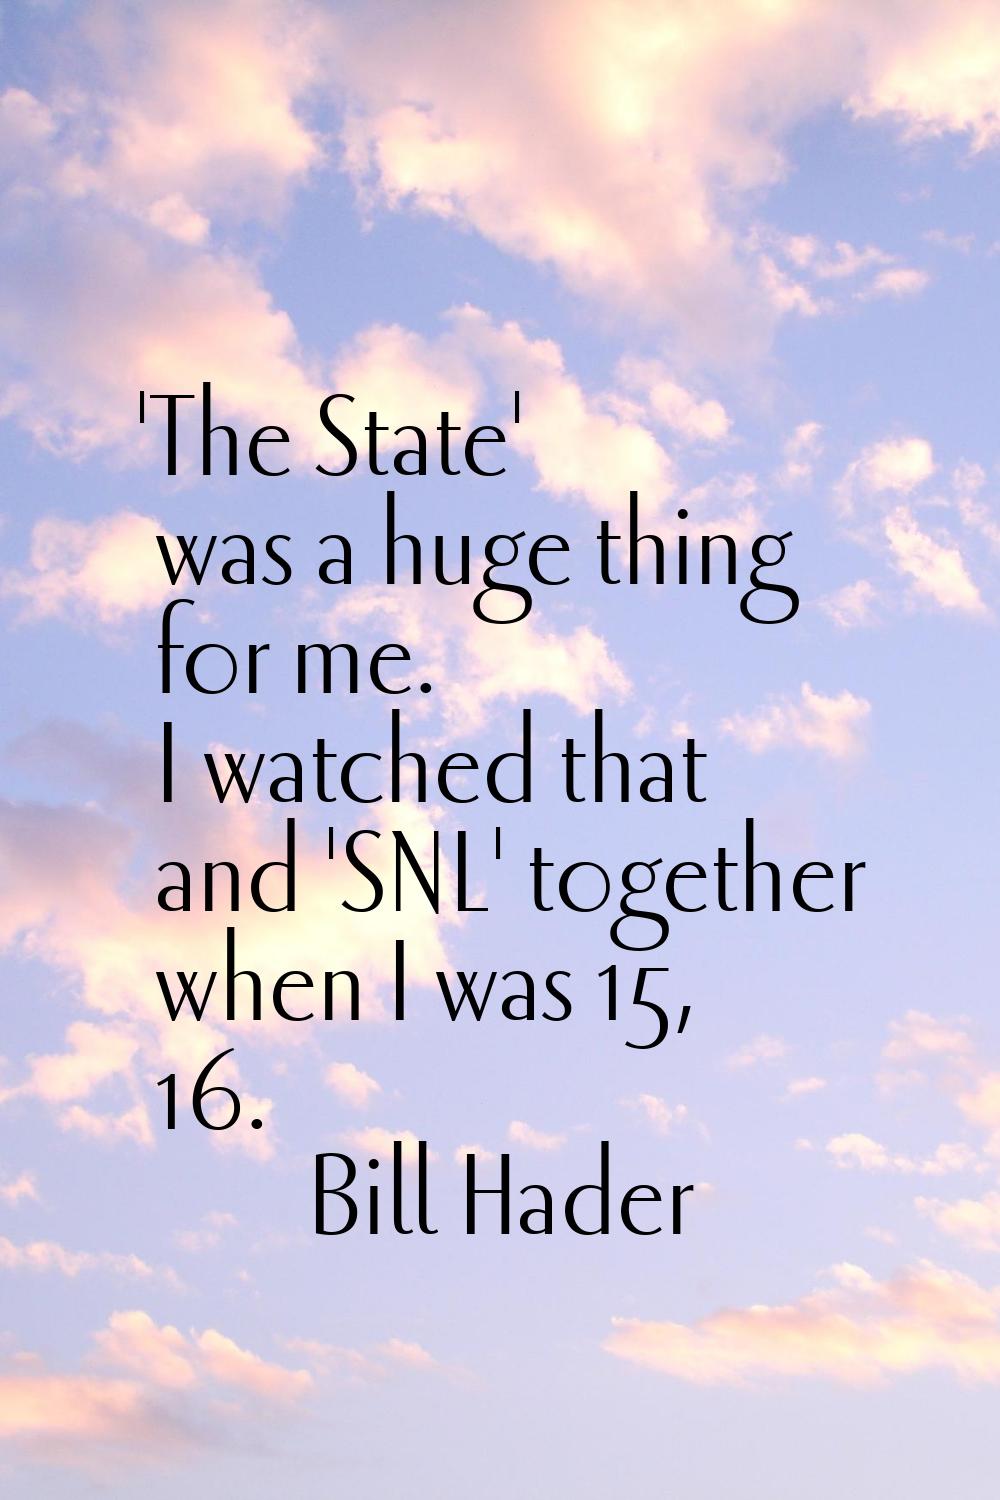 'The State' was a huge thing for me. I watched that and 'SNL' together when I was 15, 16.